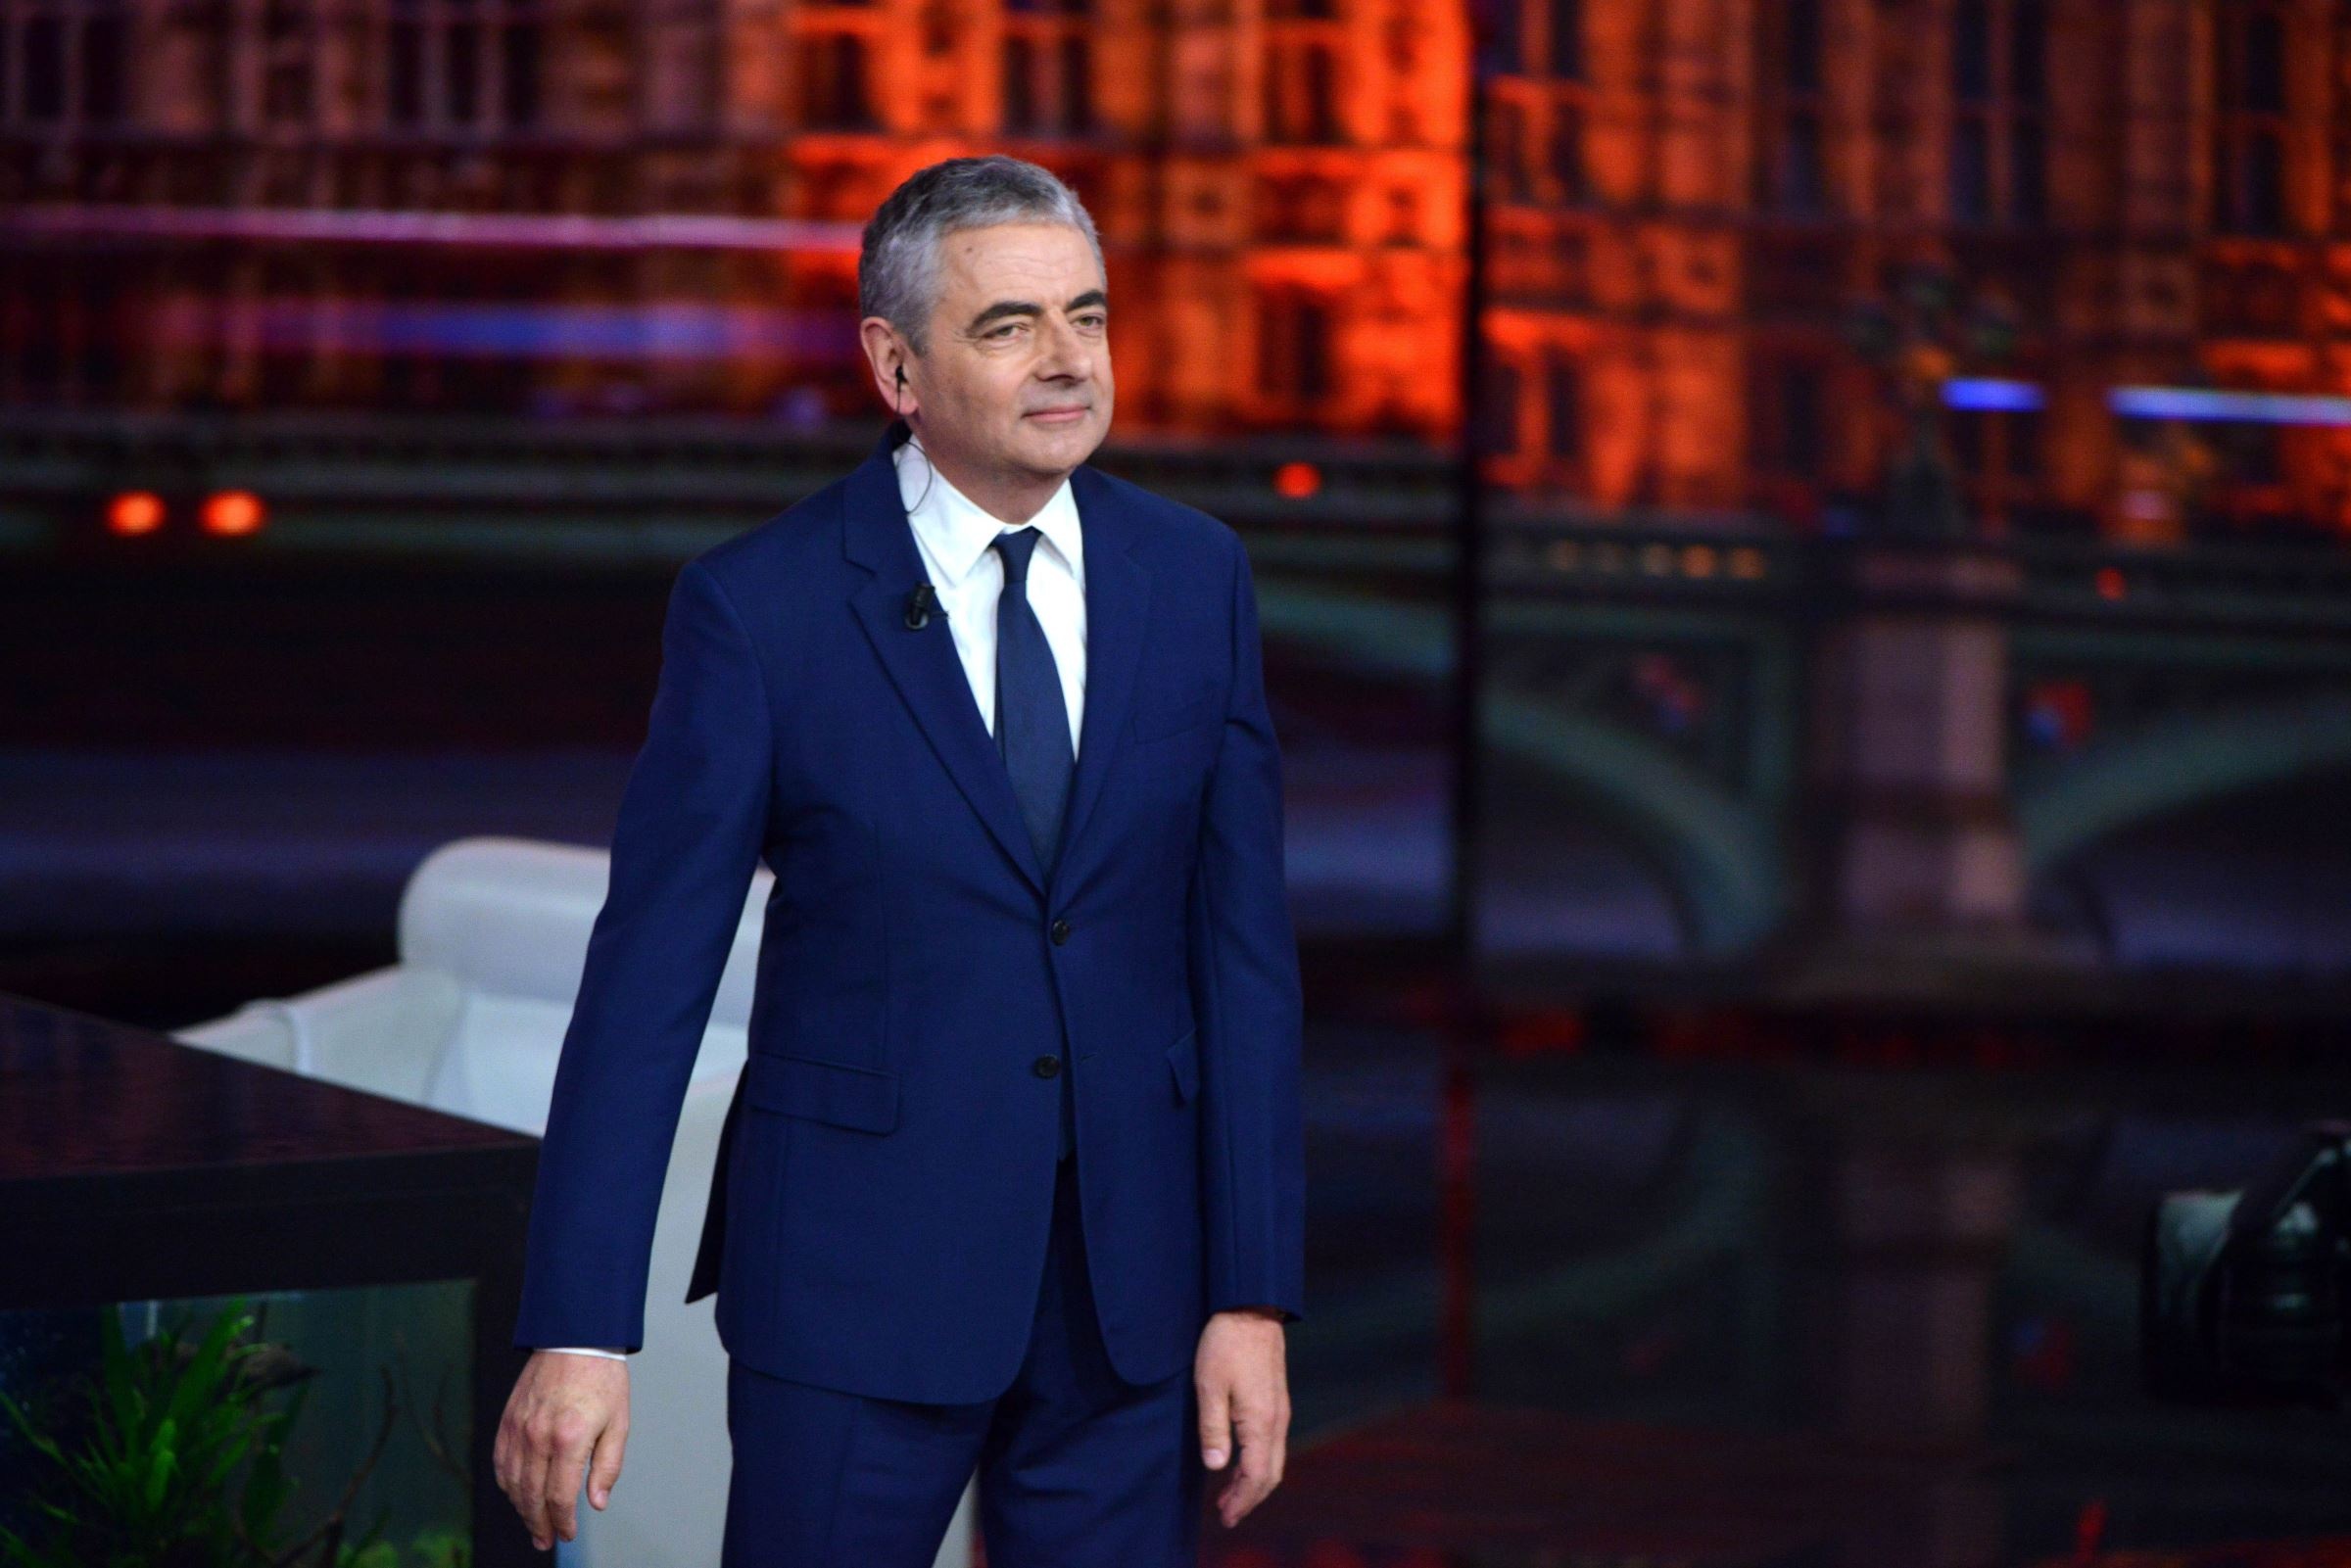 Rowan Atkinson: Mr Bean, Has fronted campaigns for Kronenbourg, Fujifilm, and Give Blood. 2400x1610 HD Wallpaper.